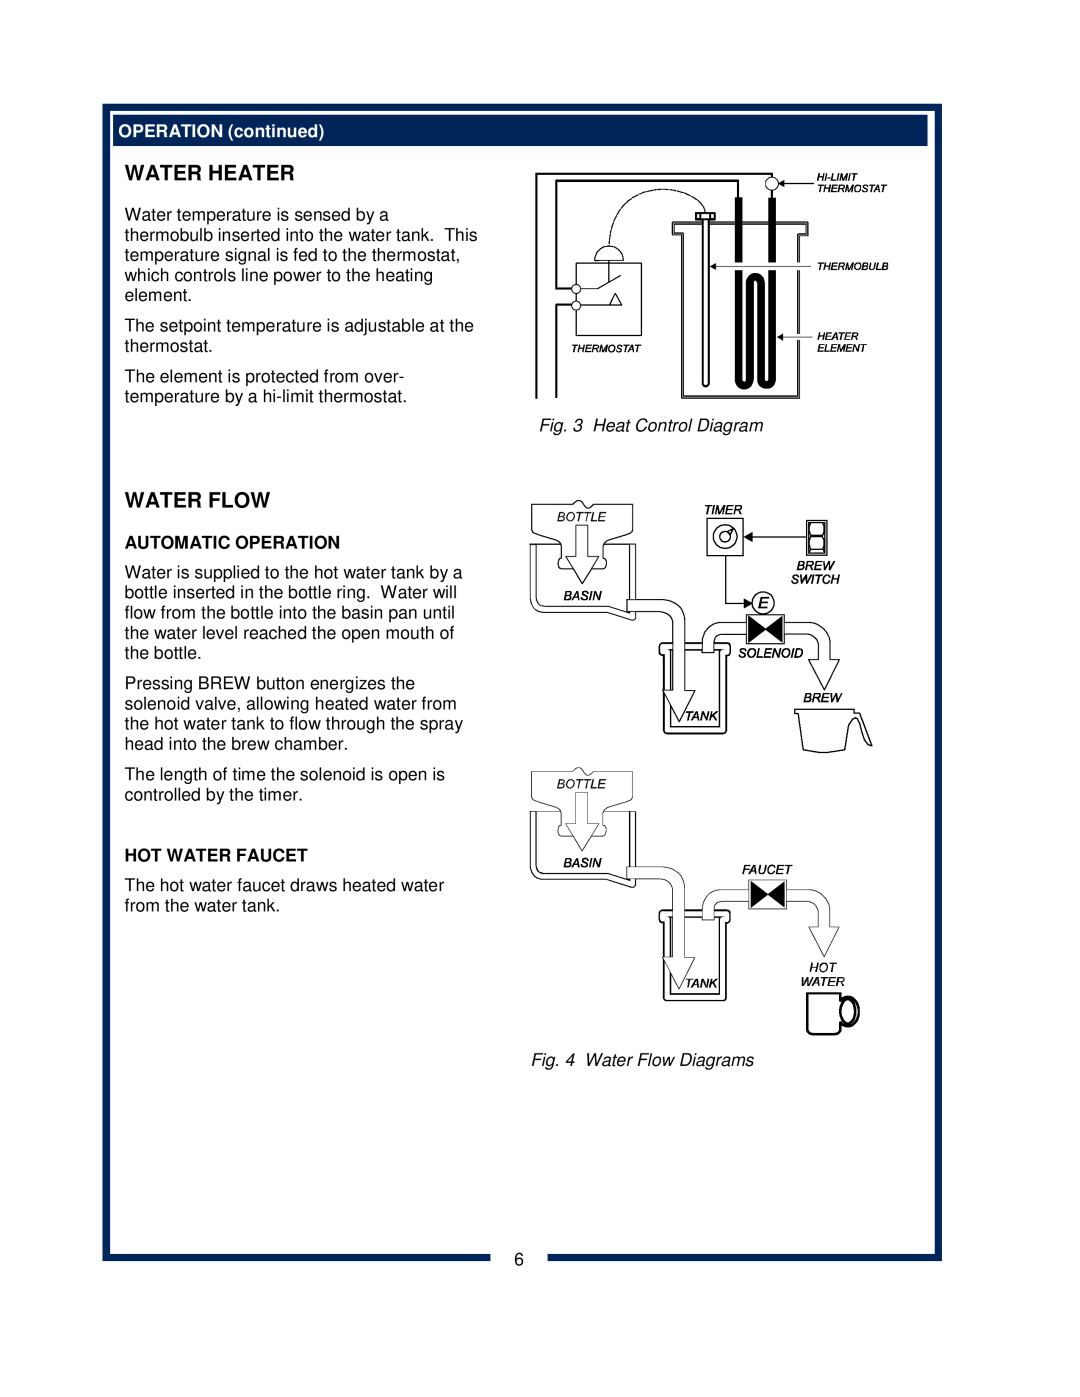 Bloomfield 8372 Water Heater, Water Flow, OPERATION continued, Heat Control Diagram, Automatic Operation, Hot Water Faucet 